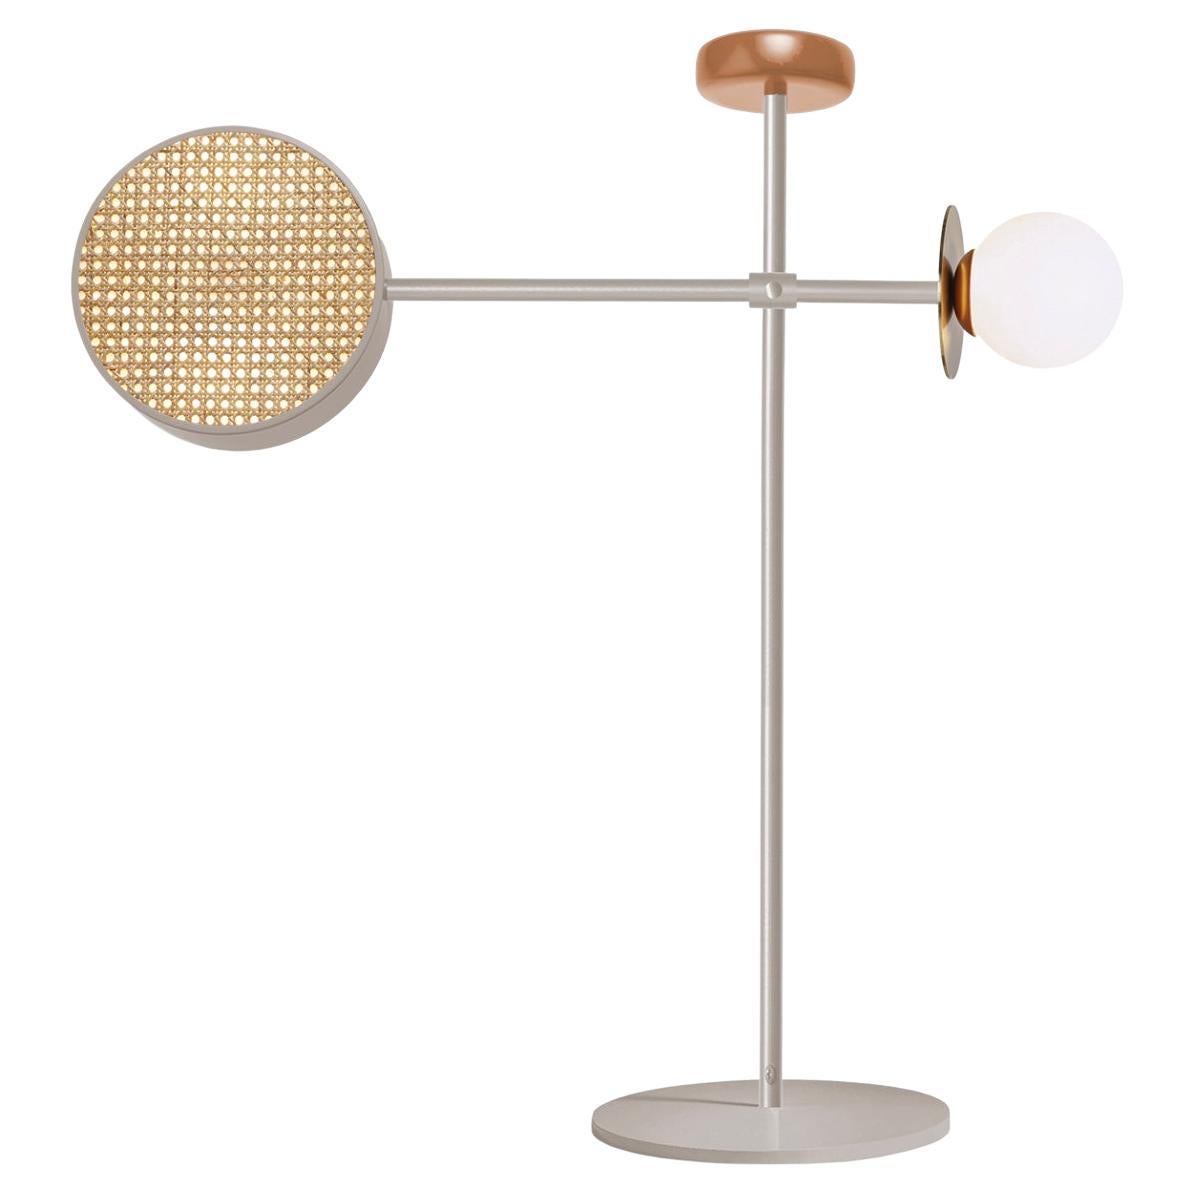 Art Deco inspired Monaco Floor Lamp in Taupe and Powder and Brass For Sale